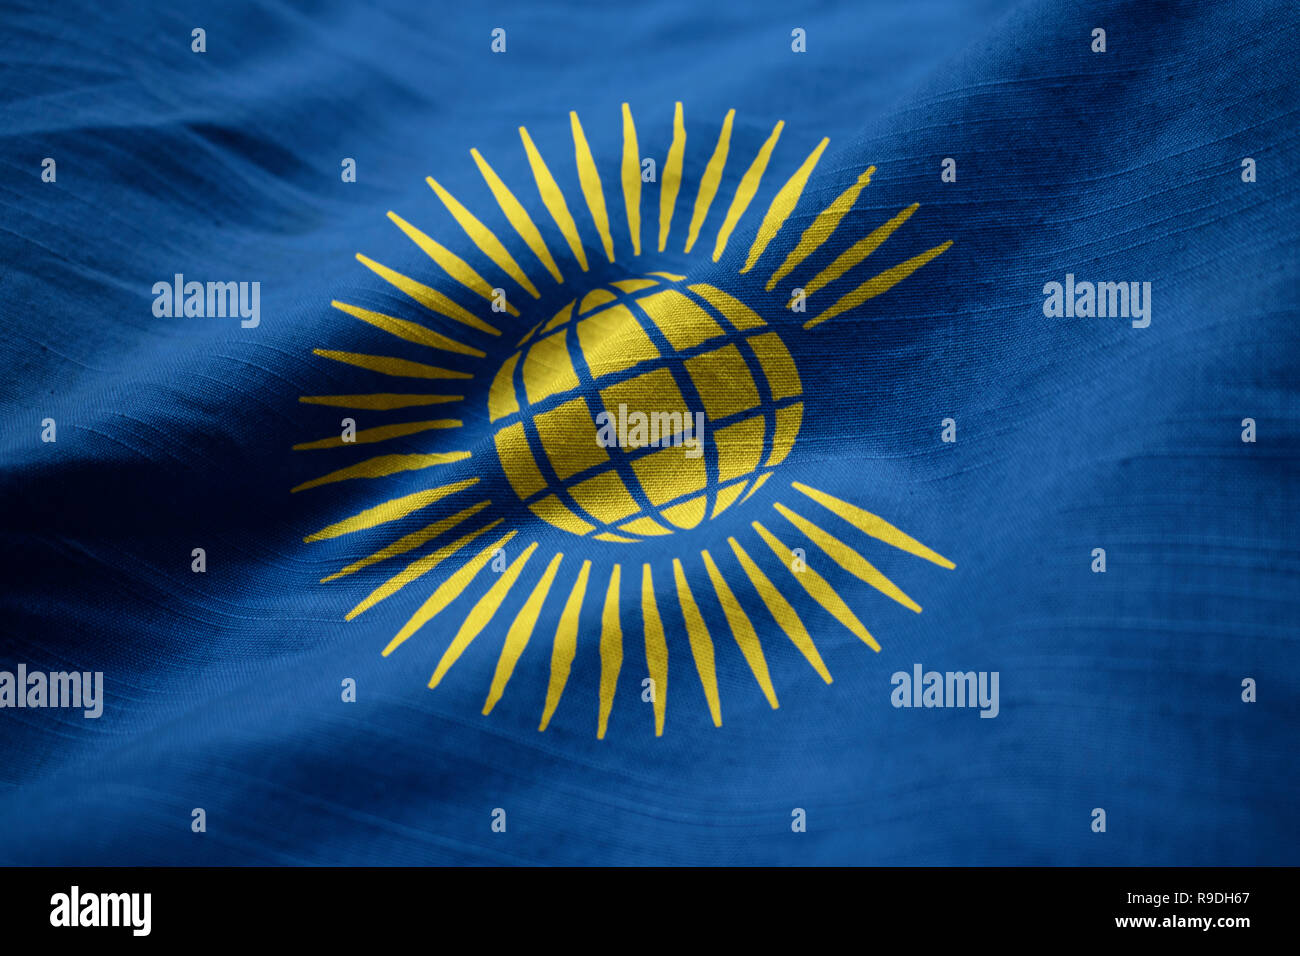 Closeup of Ruffled Commonwealth Flag, Commonwealth Flag Blowing in Wind Stock Photo